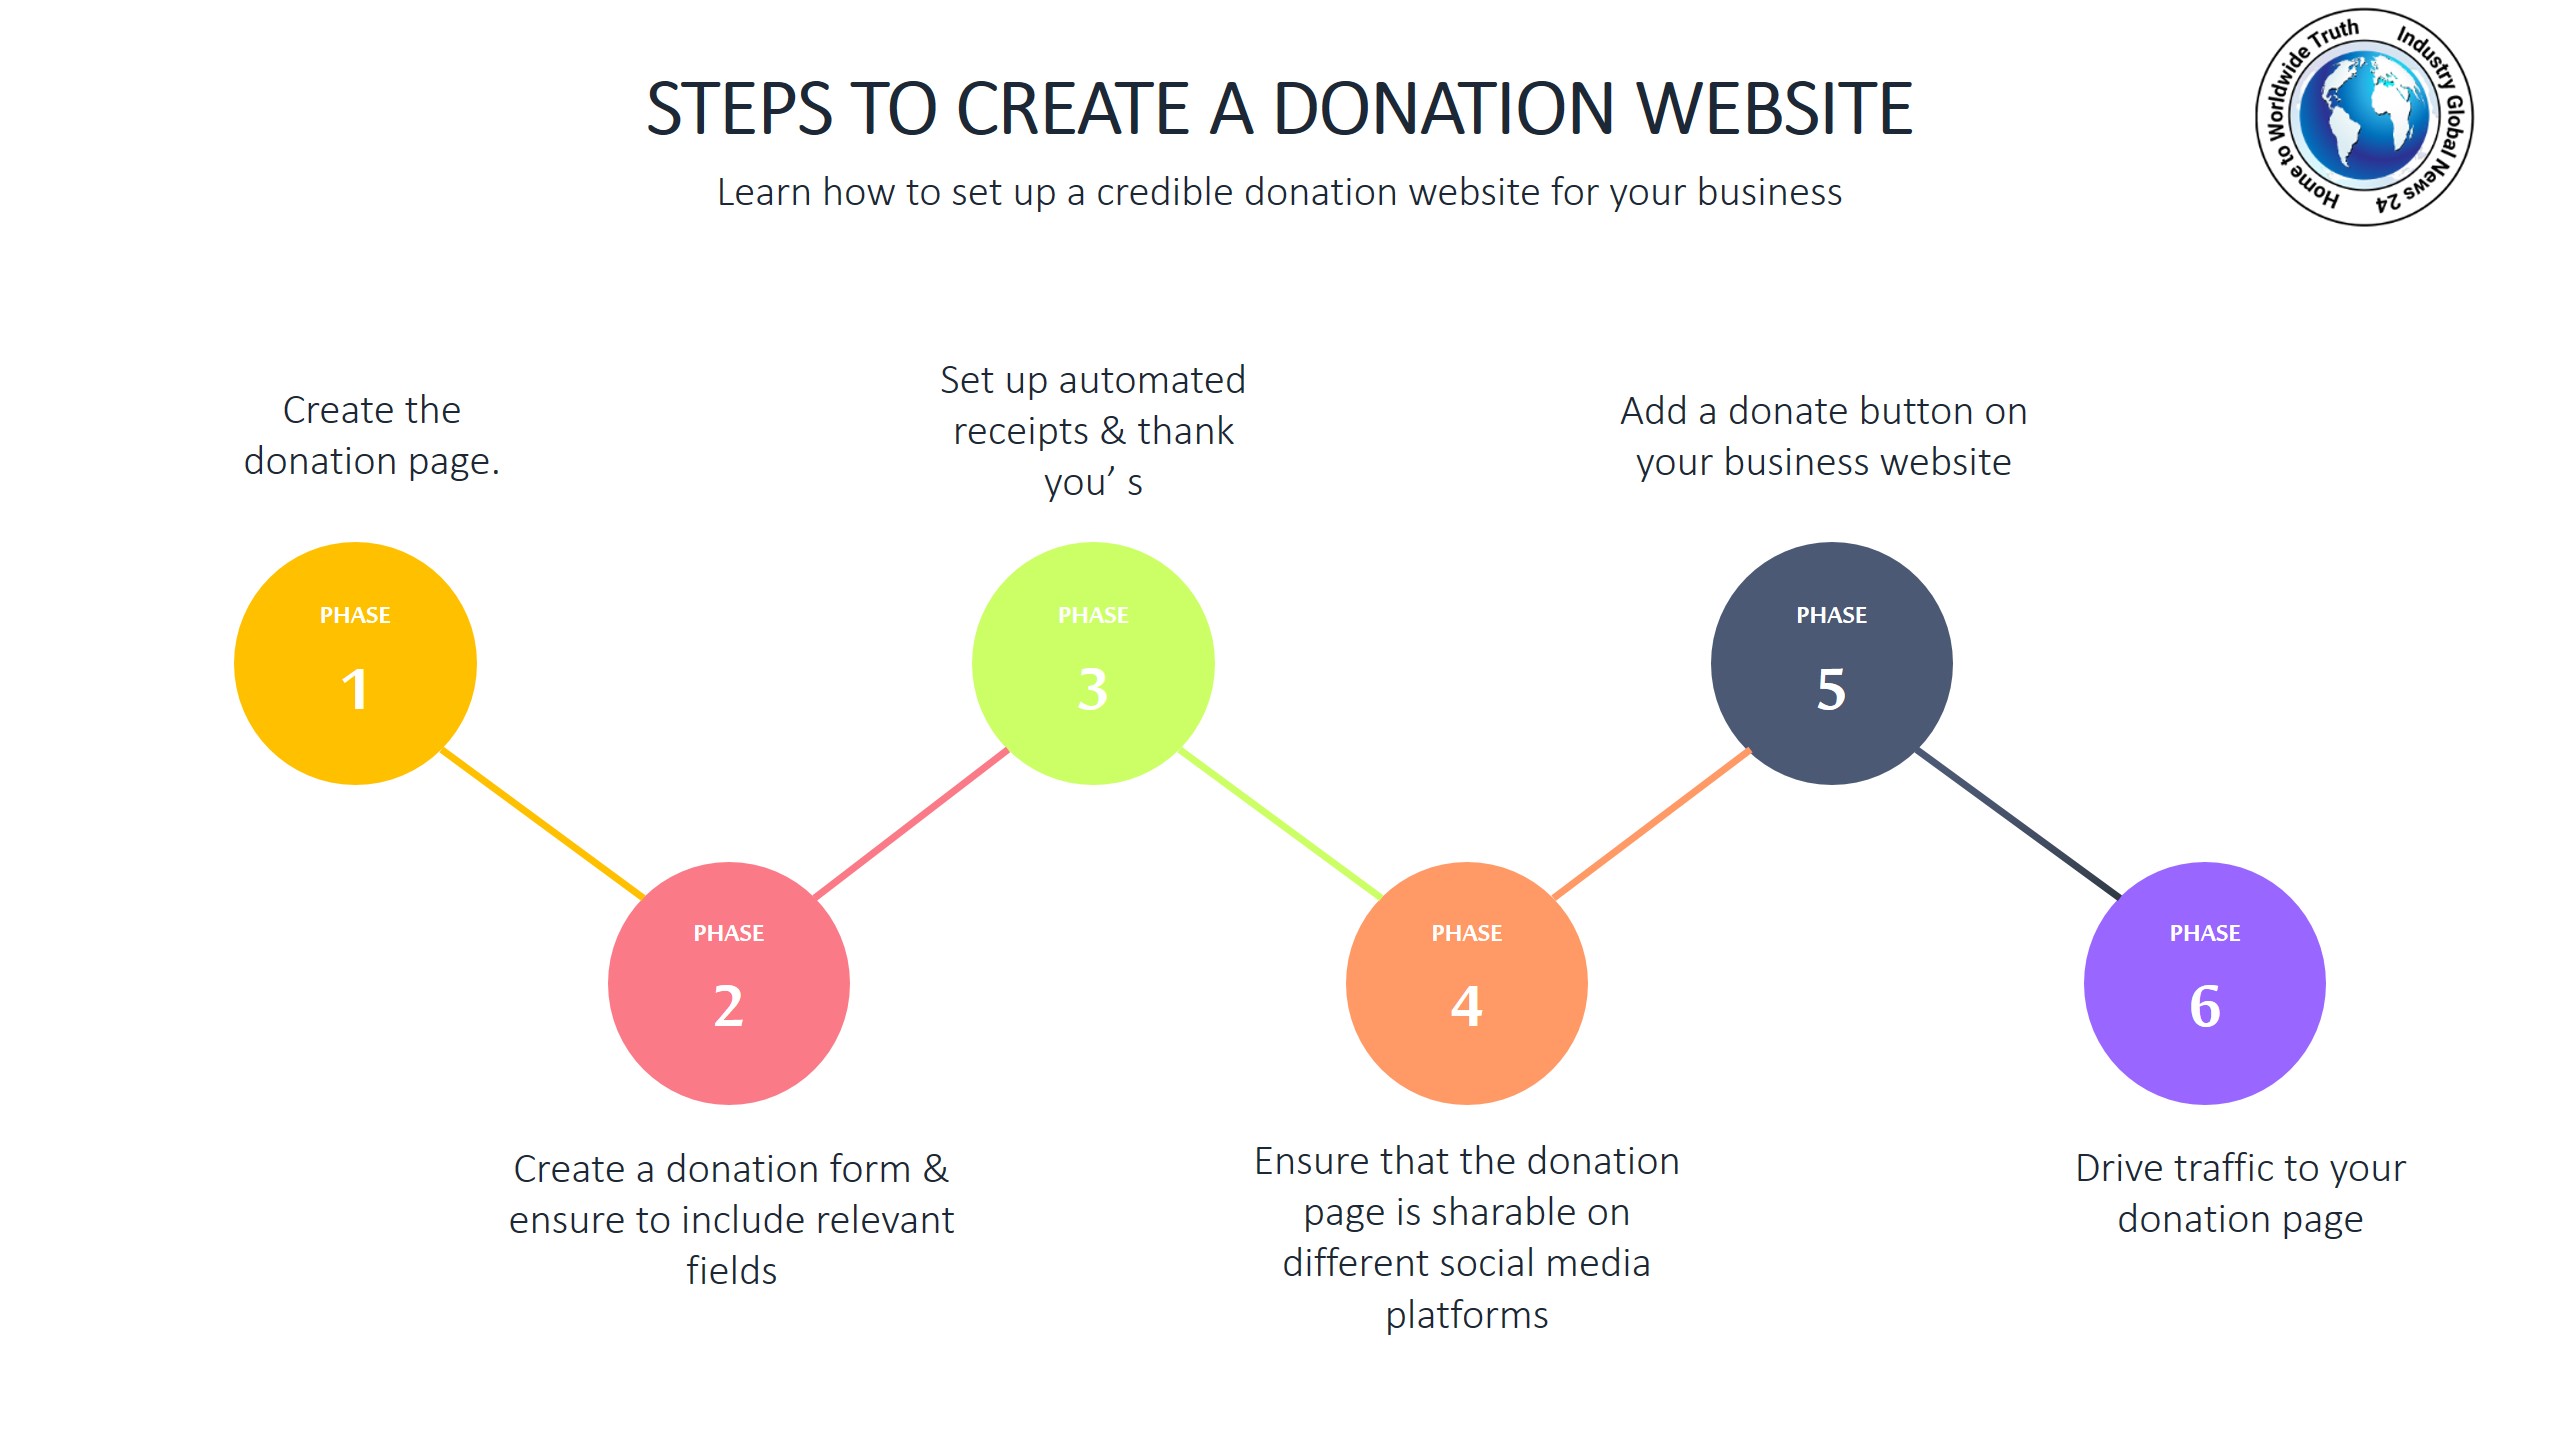 Steps to create a donation website